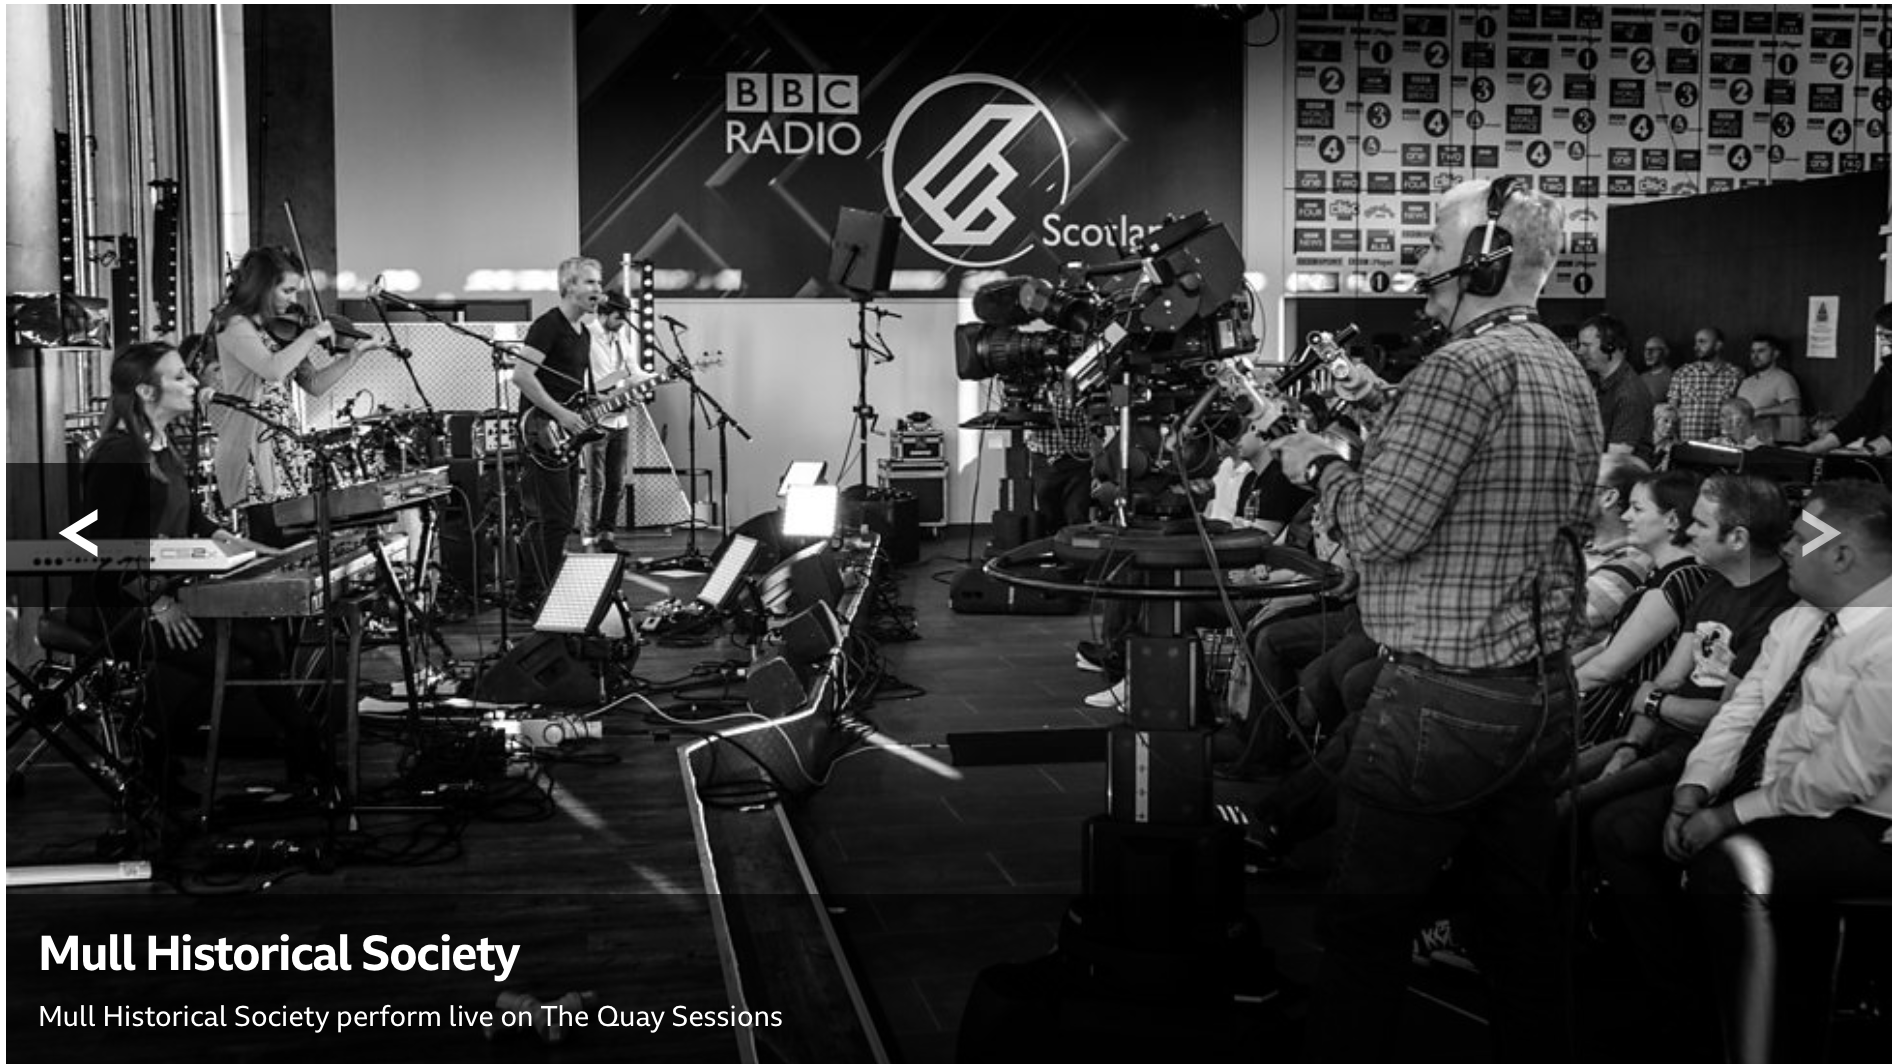 Mull Historical Society performing live on BBC Radio Scotland’s ’The Quay Sessions’ Celtic Connections Special Weds 1st February